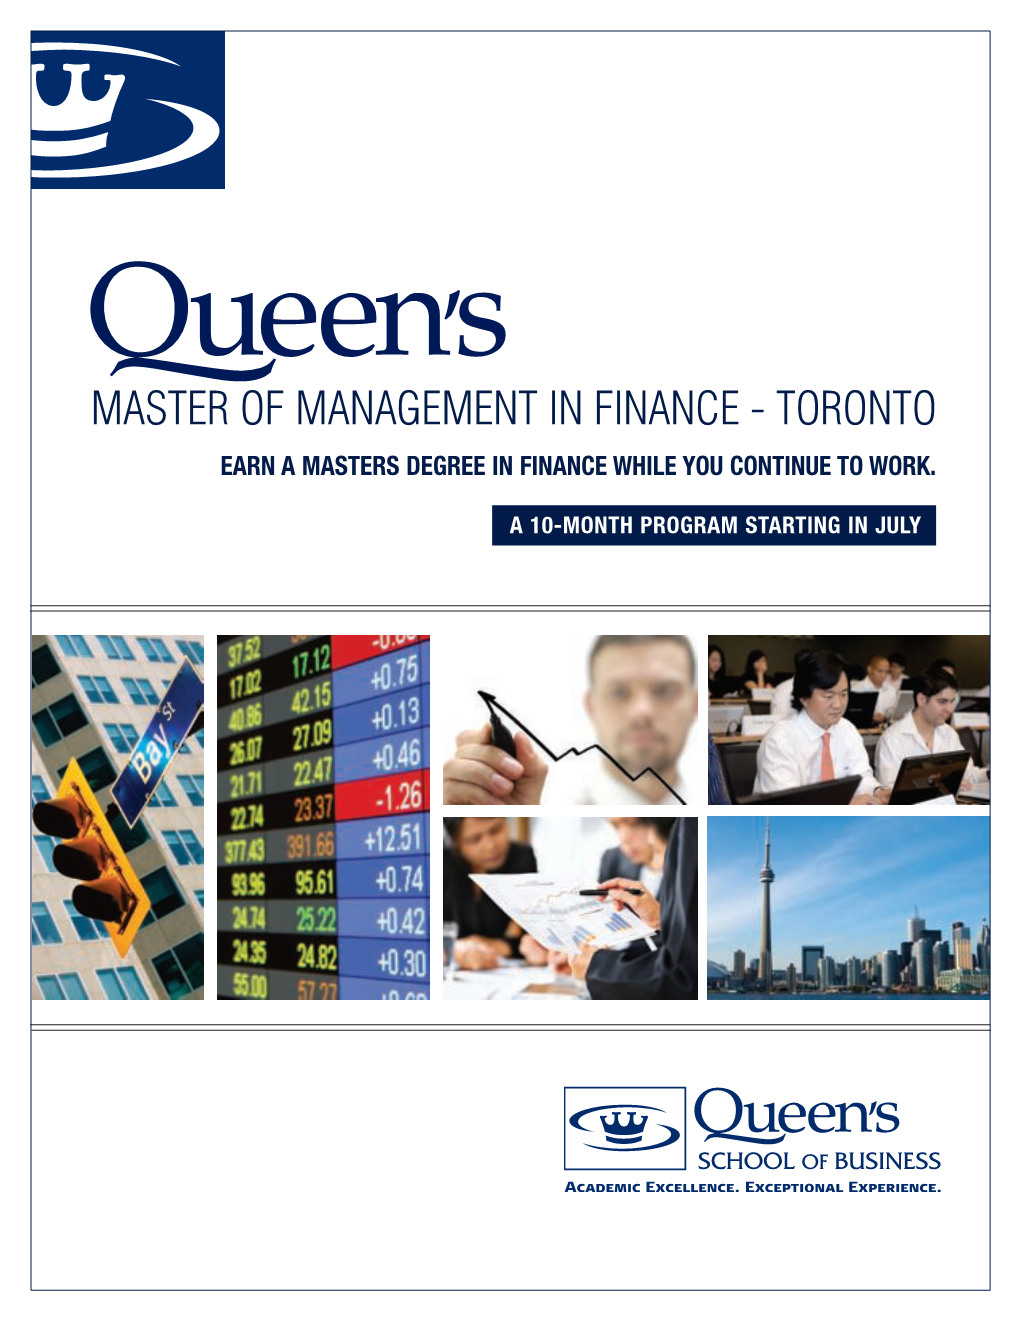 Master of Management in Finance - Toronto Earn a Masters Degree in Finance While You Continue to Work